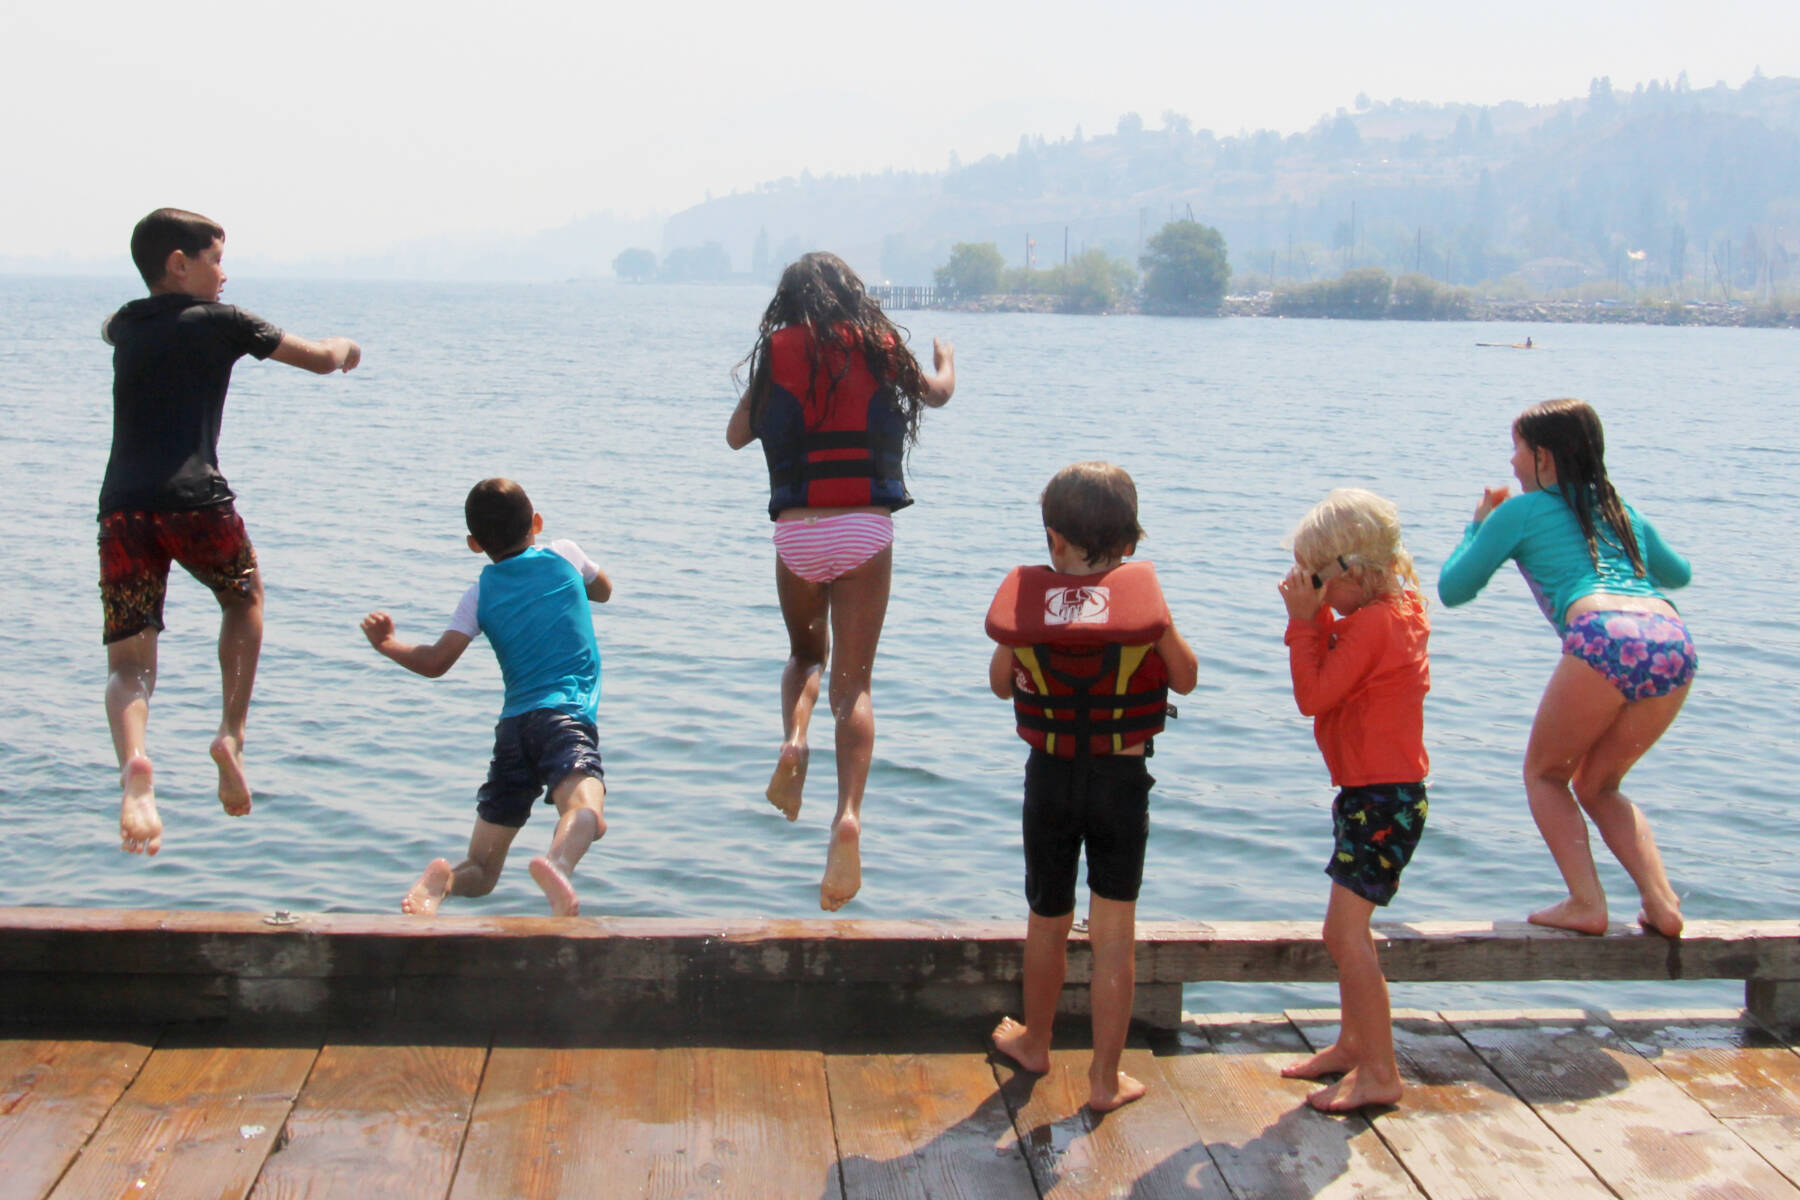 Children enjoy the pier in Summerland on the last day of summer holidays in 2022. (Photo by Jessica Shaw)